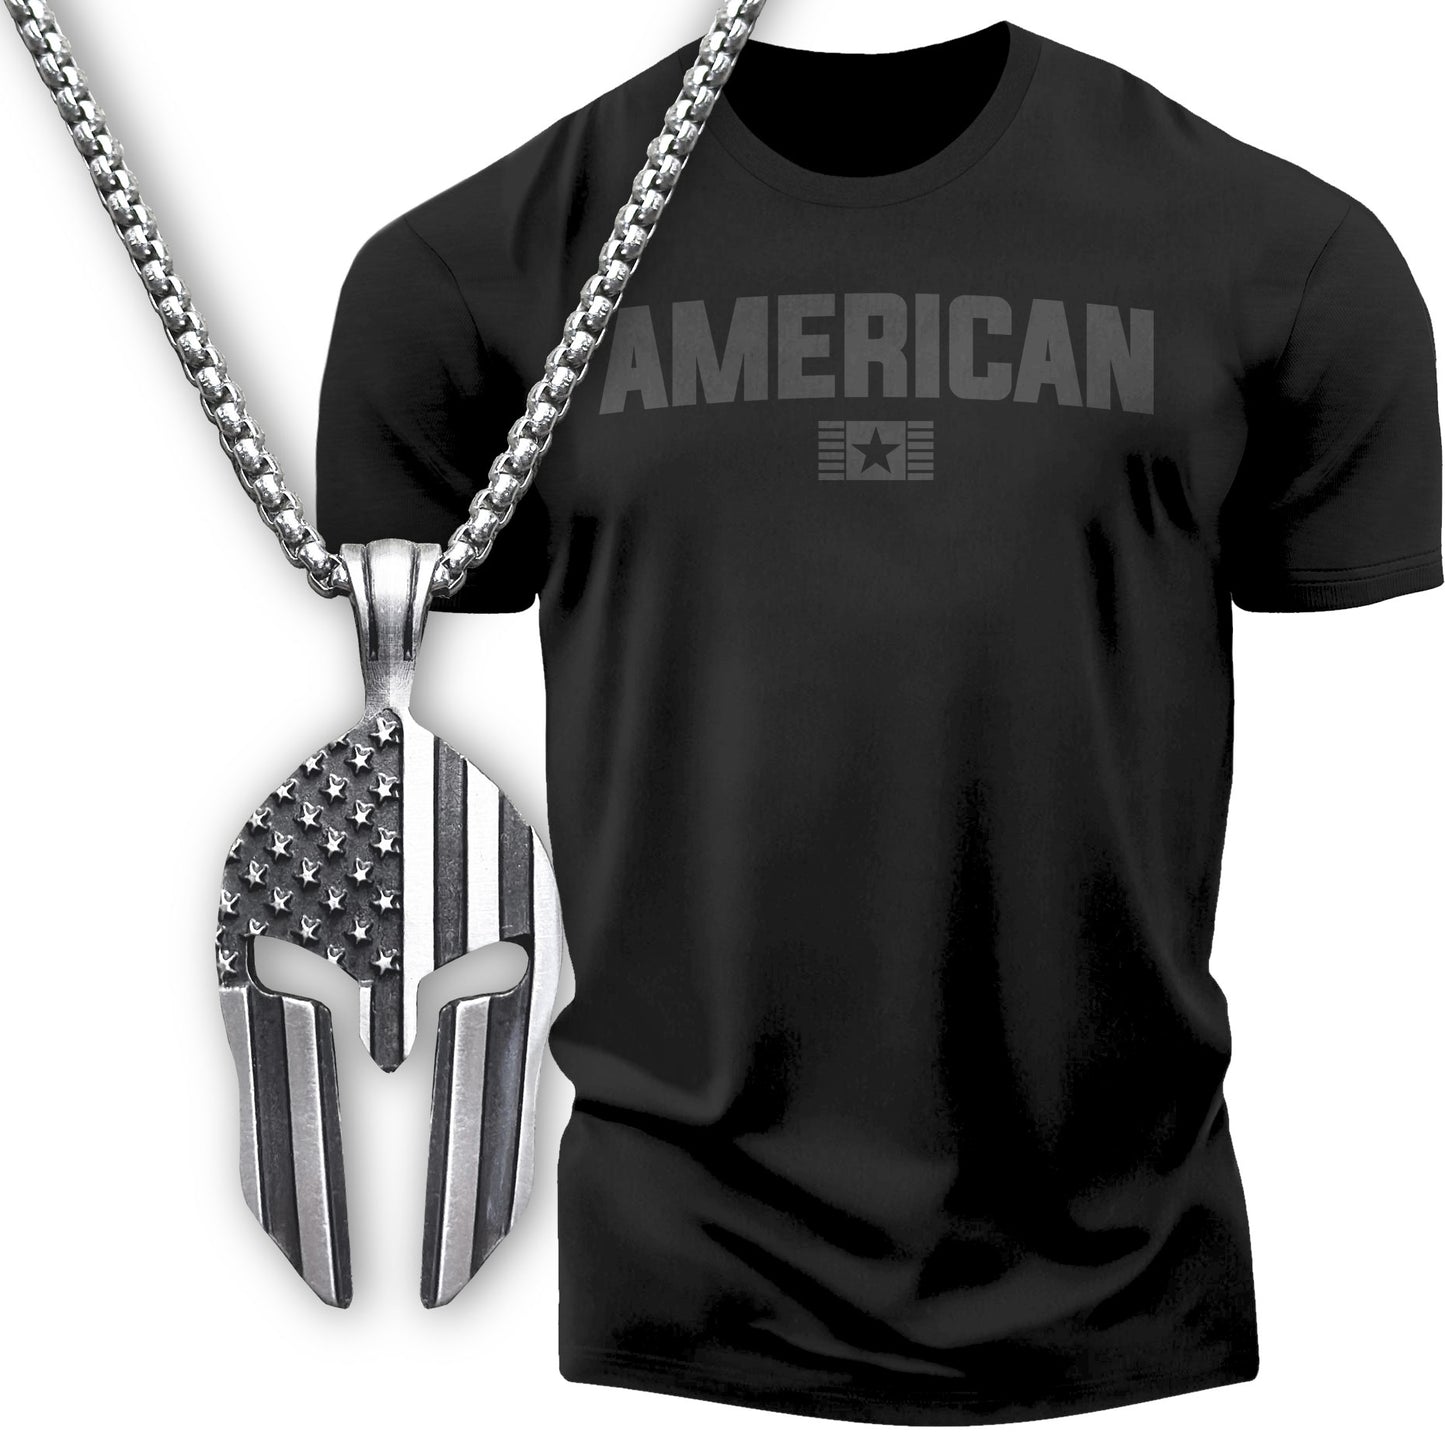 Gift Set for Men American Workout Gym Shirt with Spartan Warrior Pendant